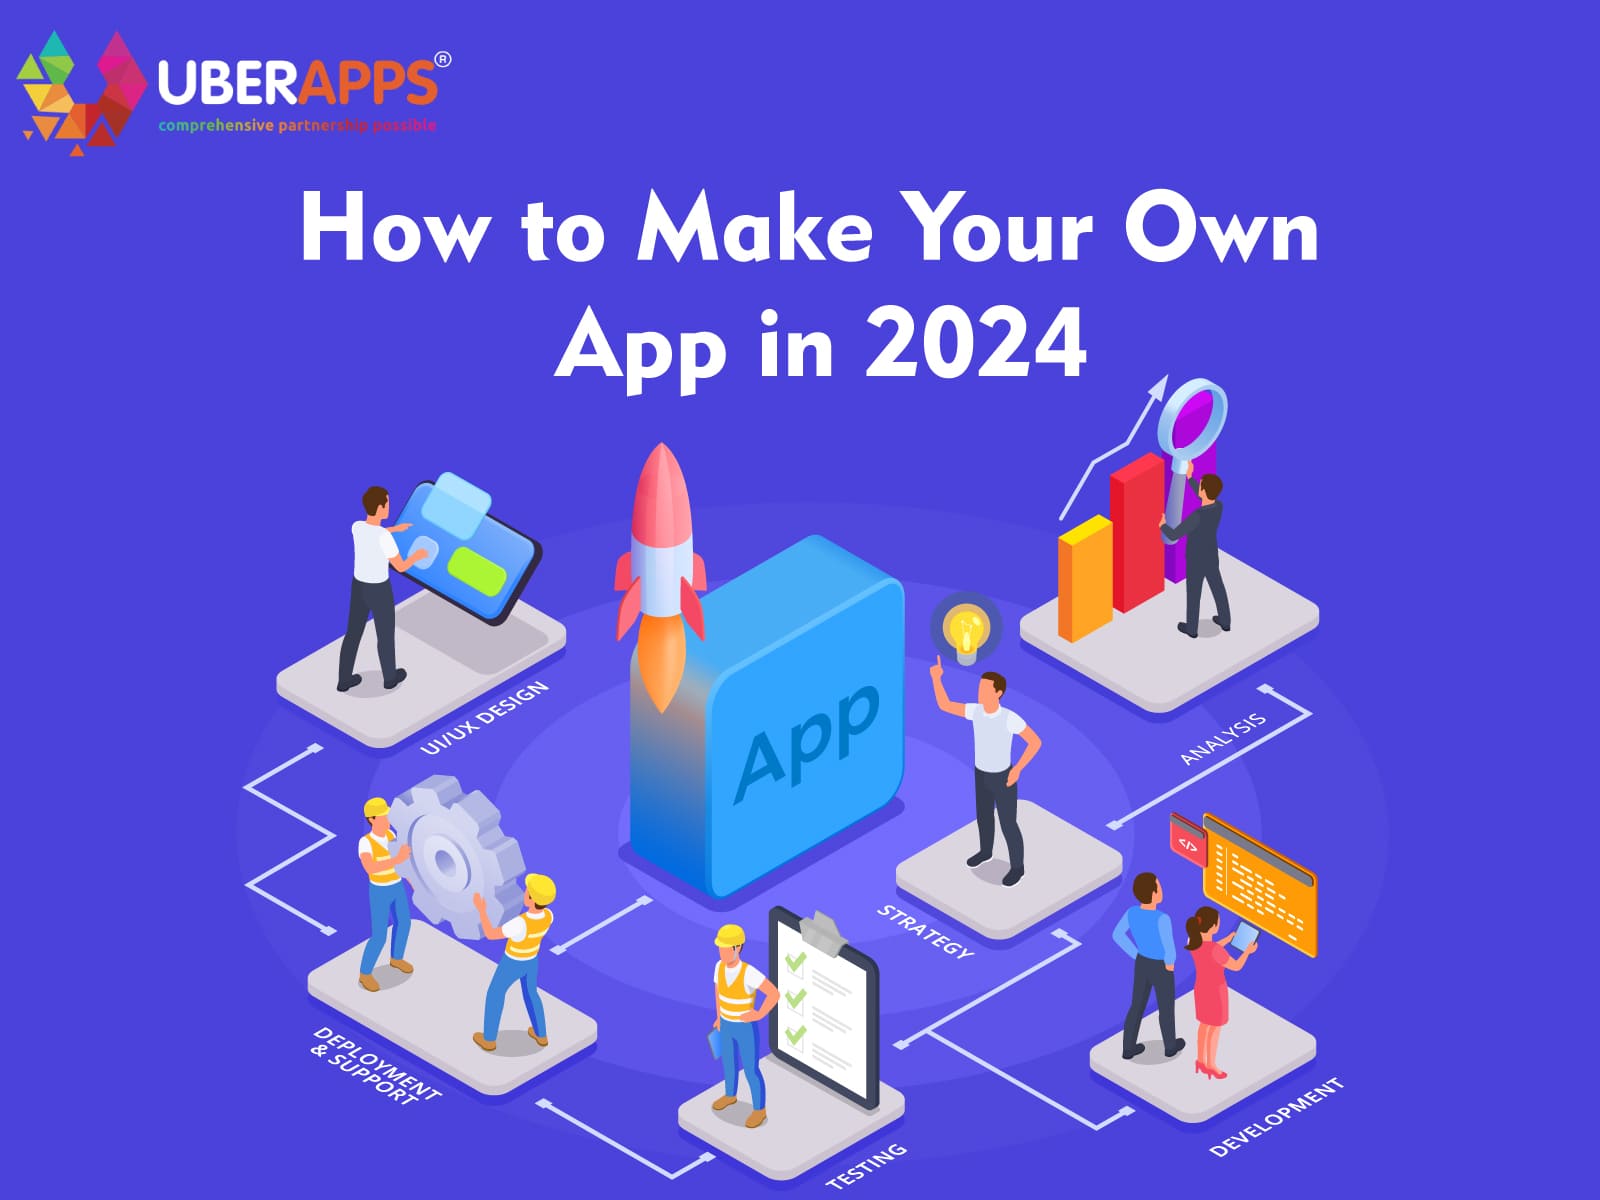 How to Make Your Own App in 2024